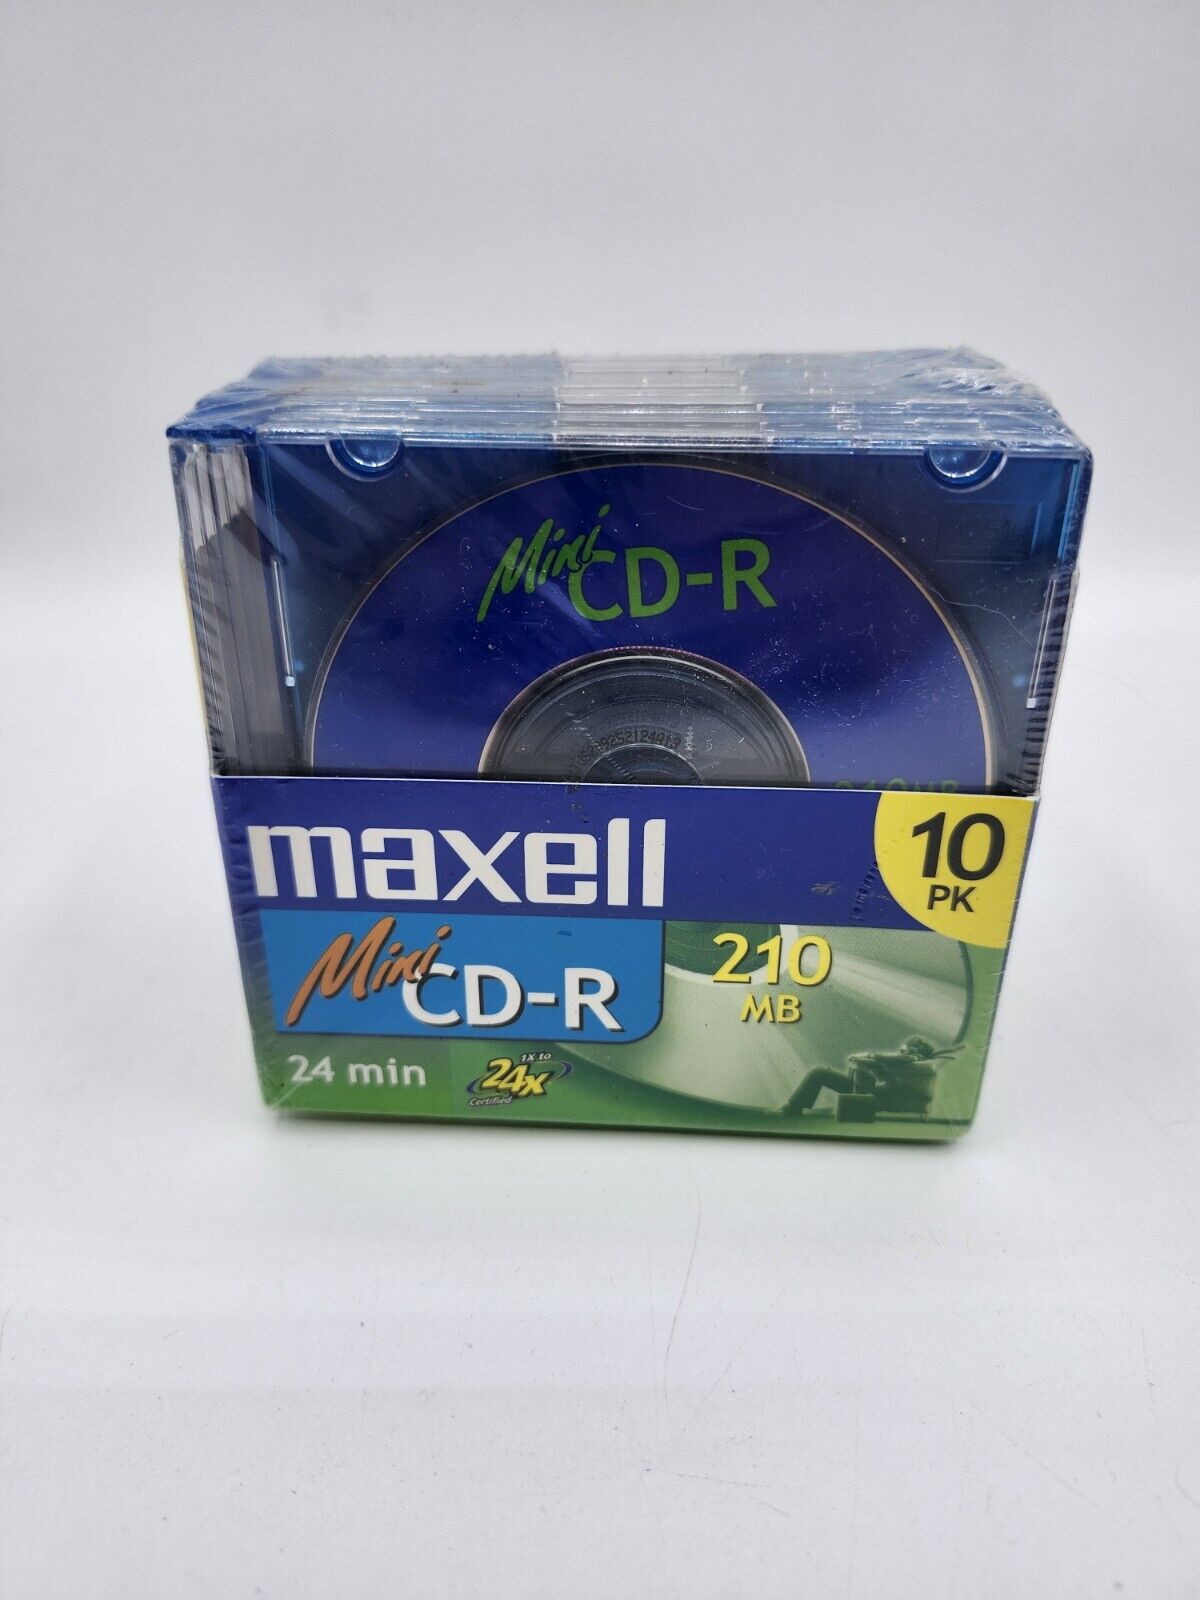 Maxell Mini CD-R Recordable Discs 10 Pack 210MB 24x Speed w Jewel Cases